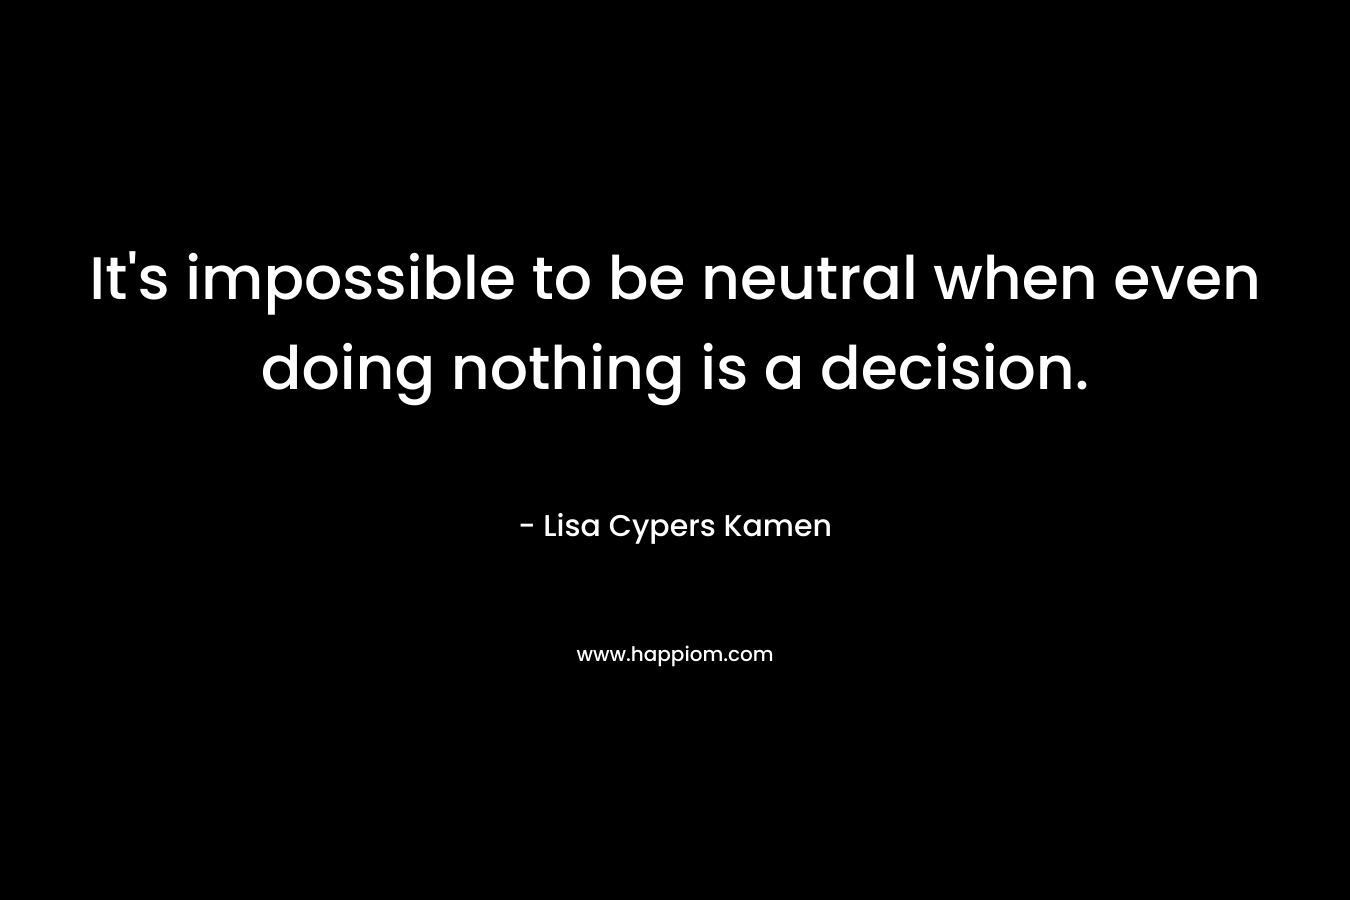 It’s impossible to be neutral when even doing nothing is a decision. – Lisa Cypers Kamen